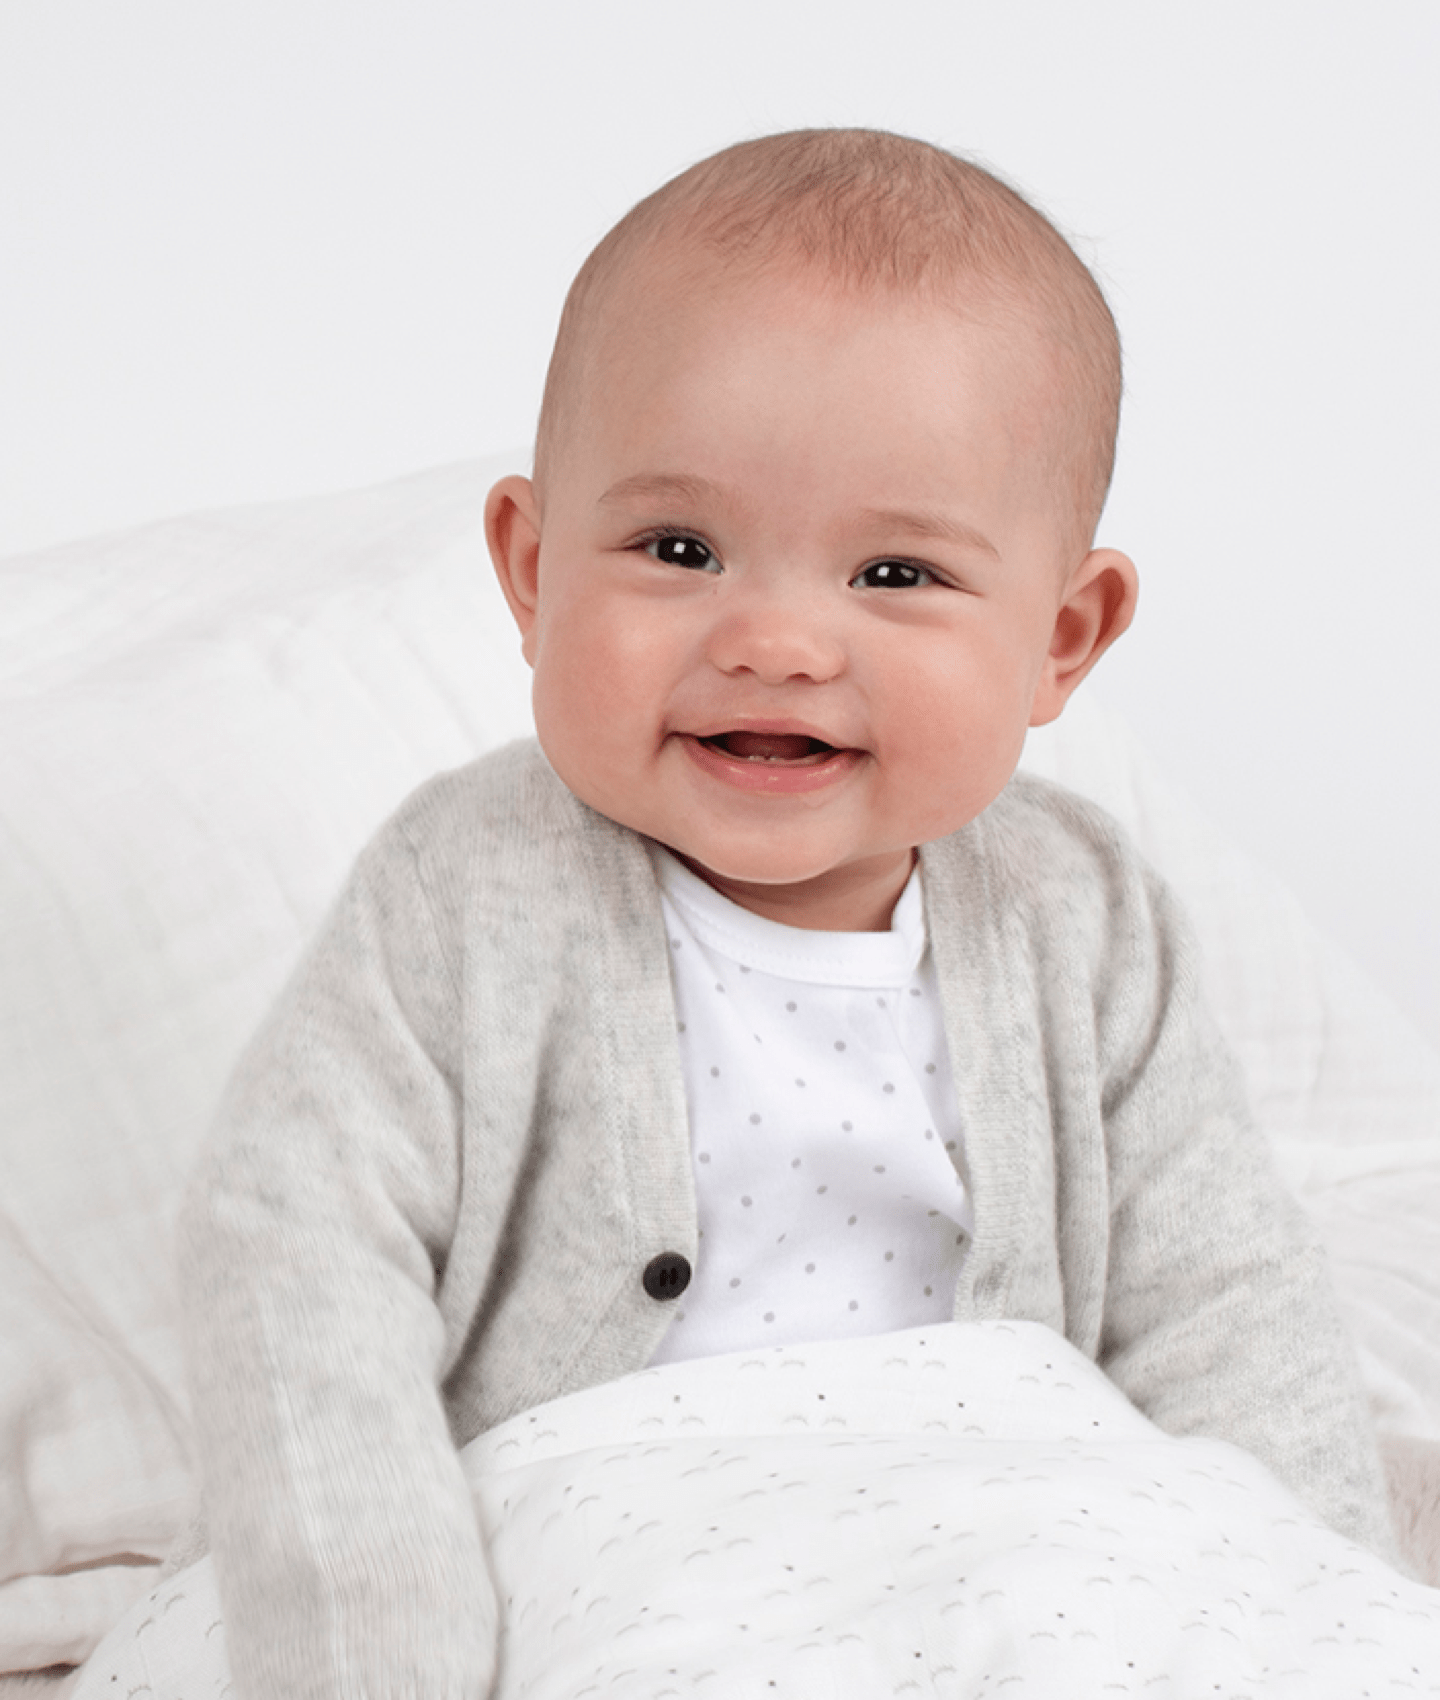 Cotton - The best fabric for your newborn